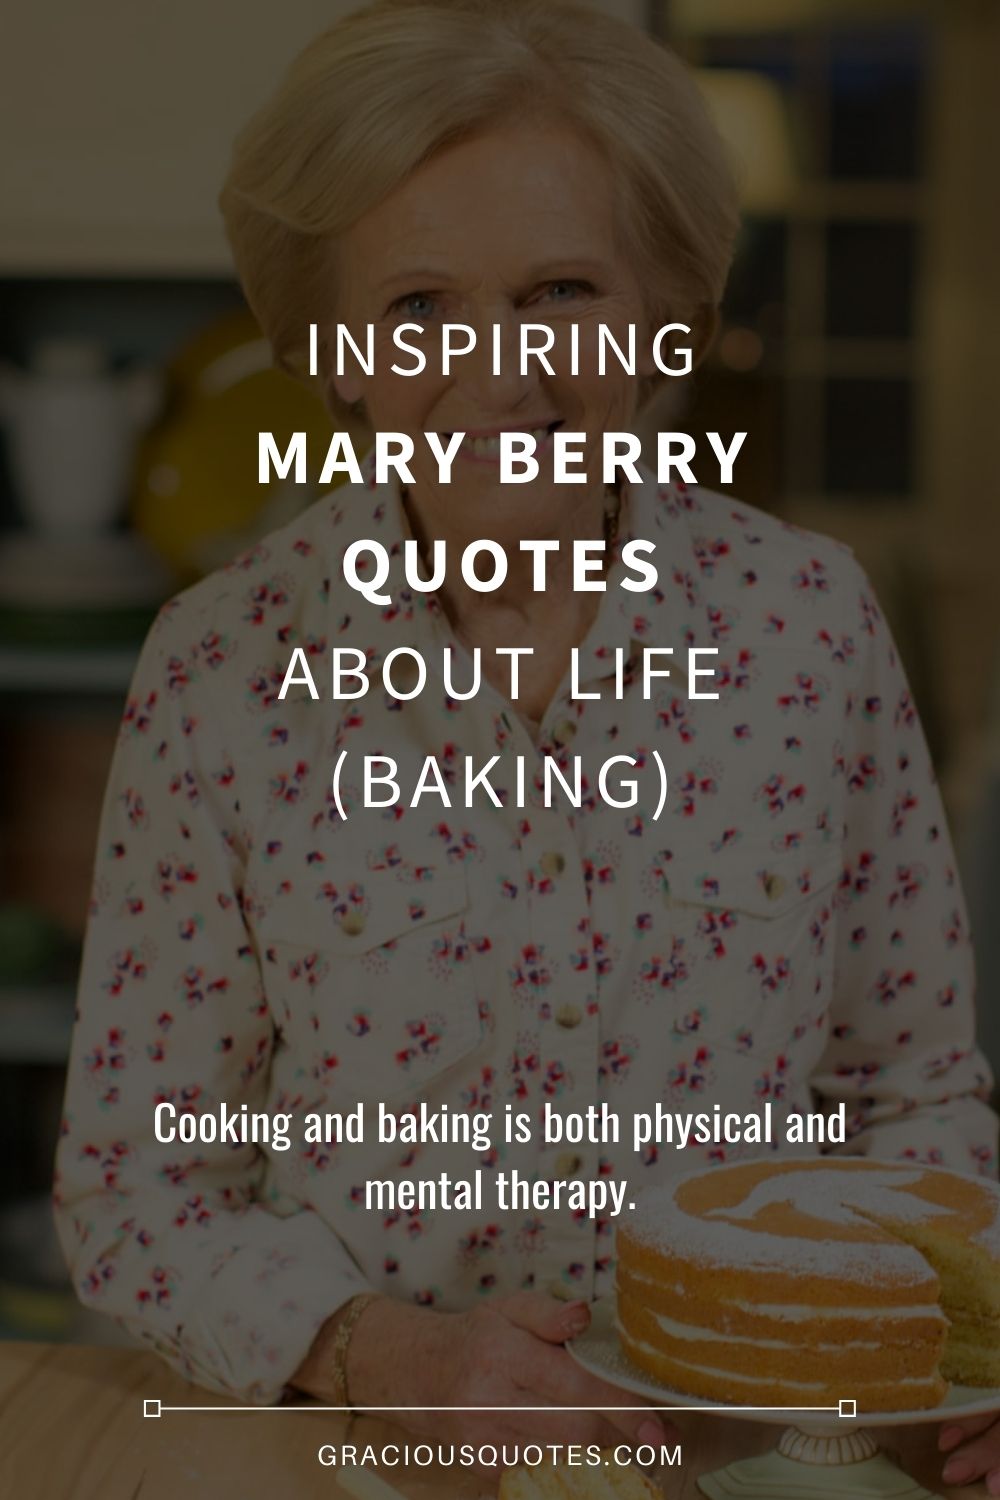 Inspiring Mary Berry Quotes About Life (BAKING) - Gracious Quotes